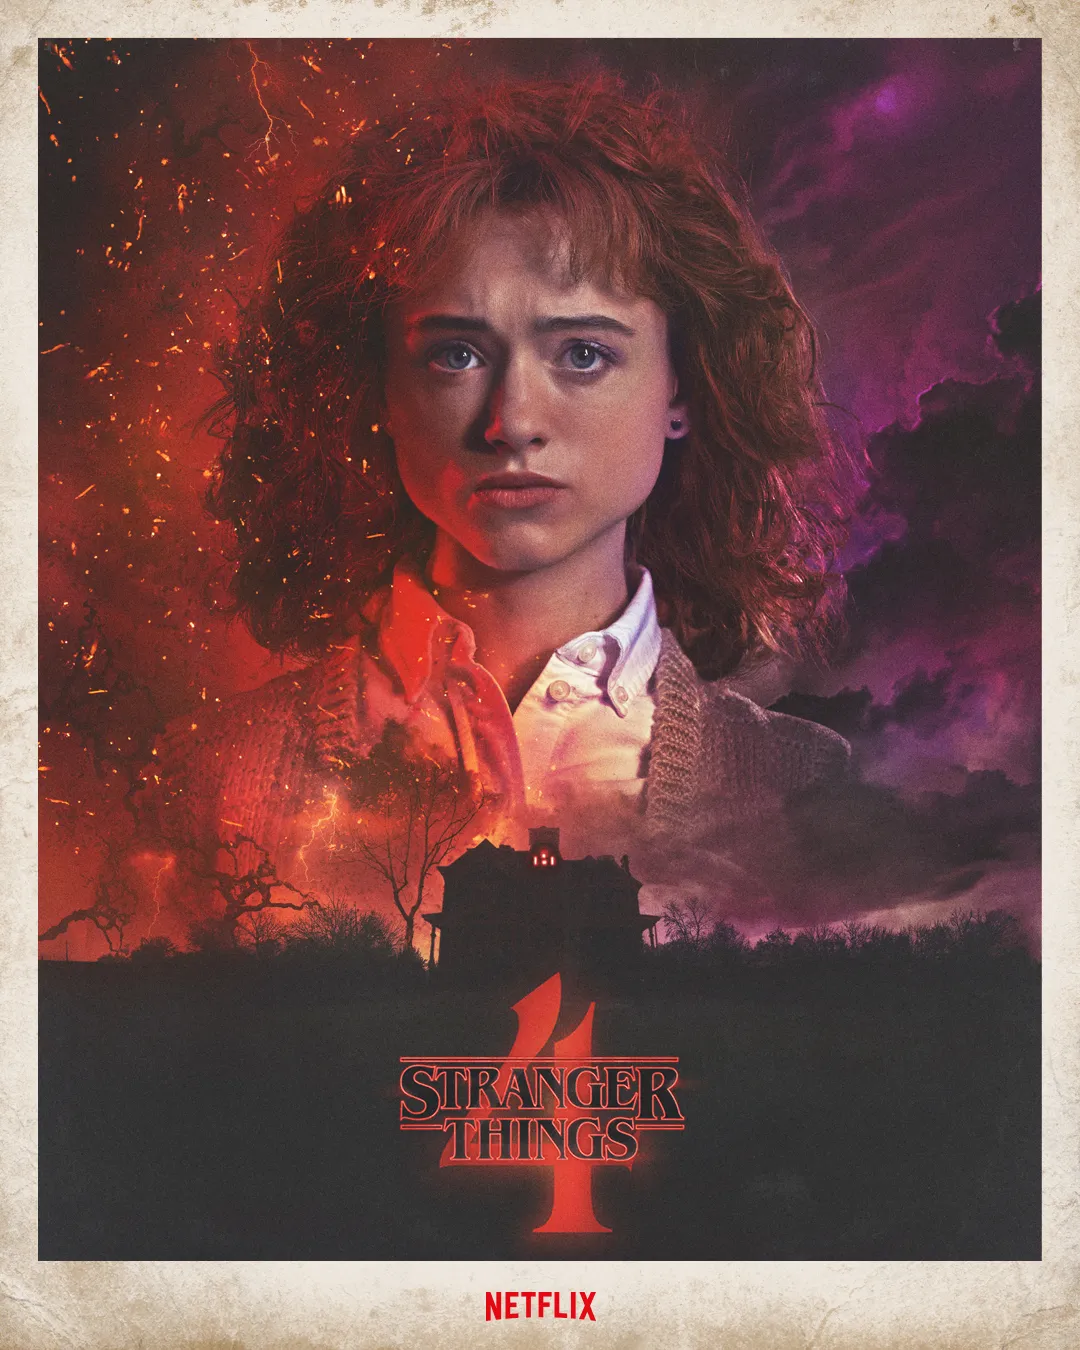 Stranger Things season 2 posters: New characters, fears